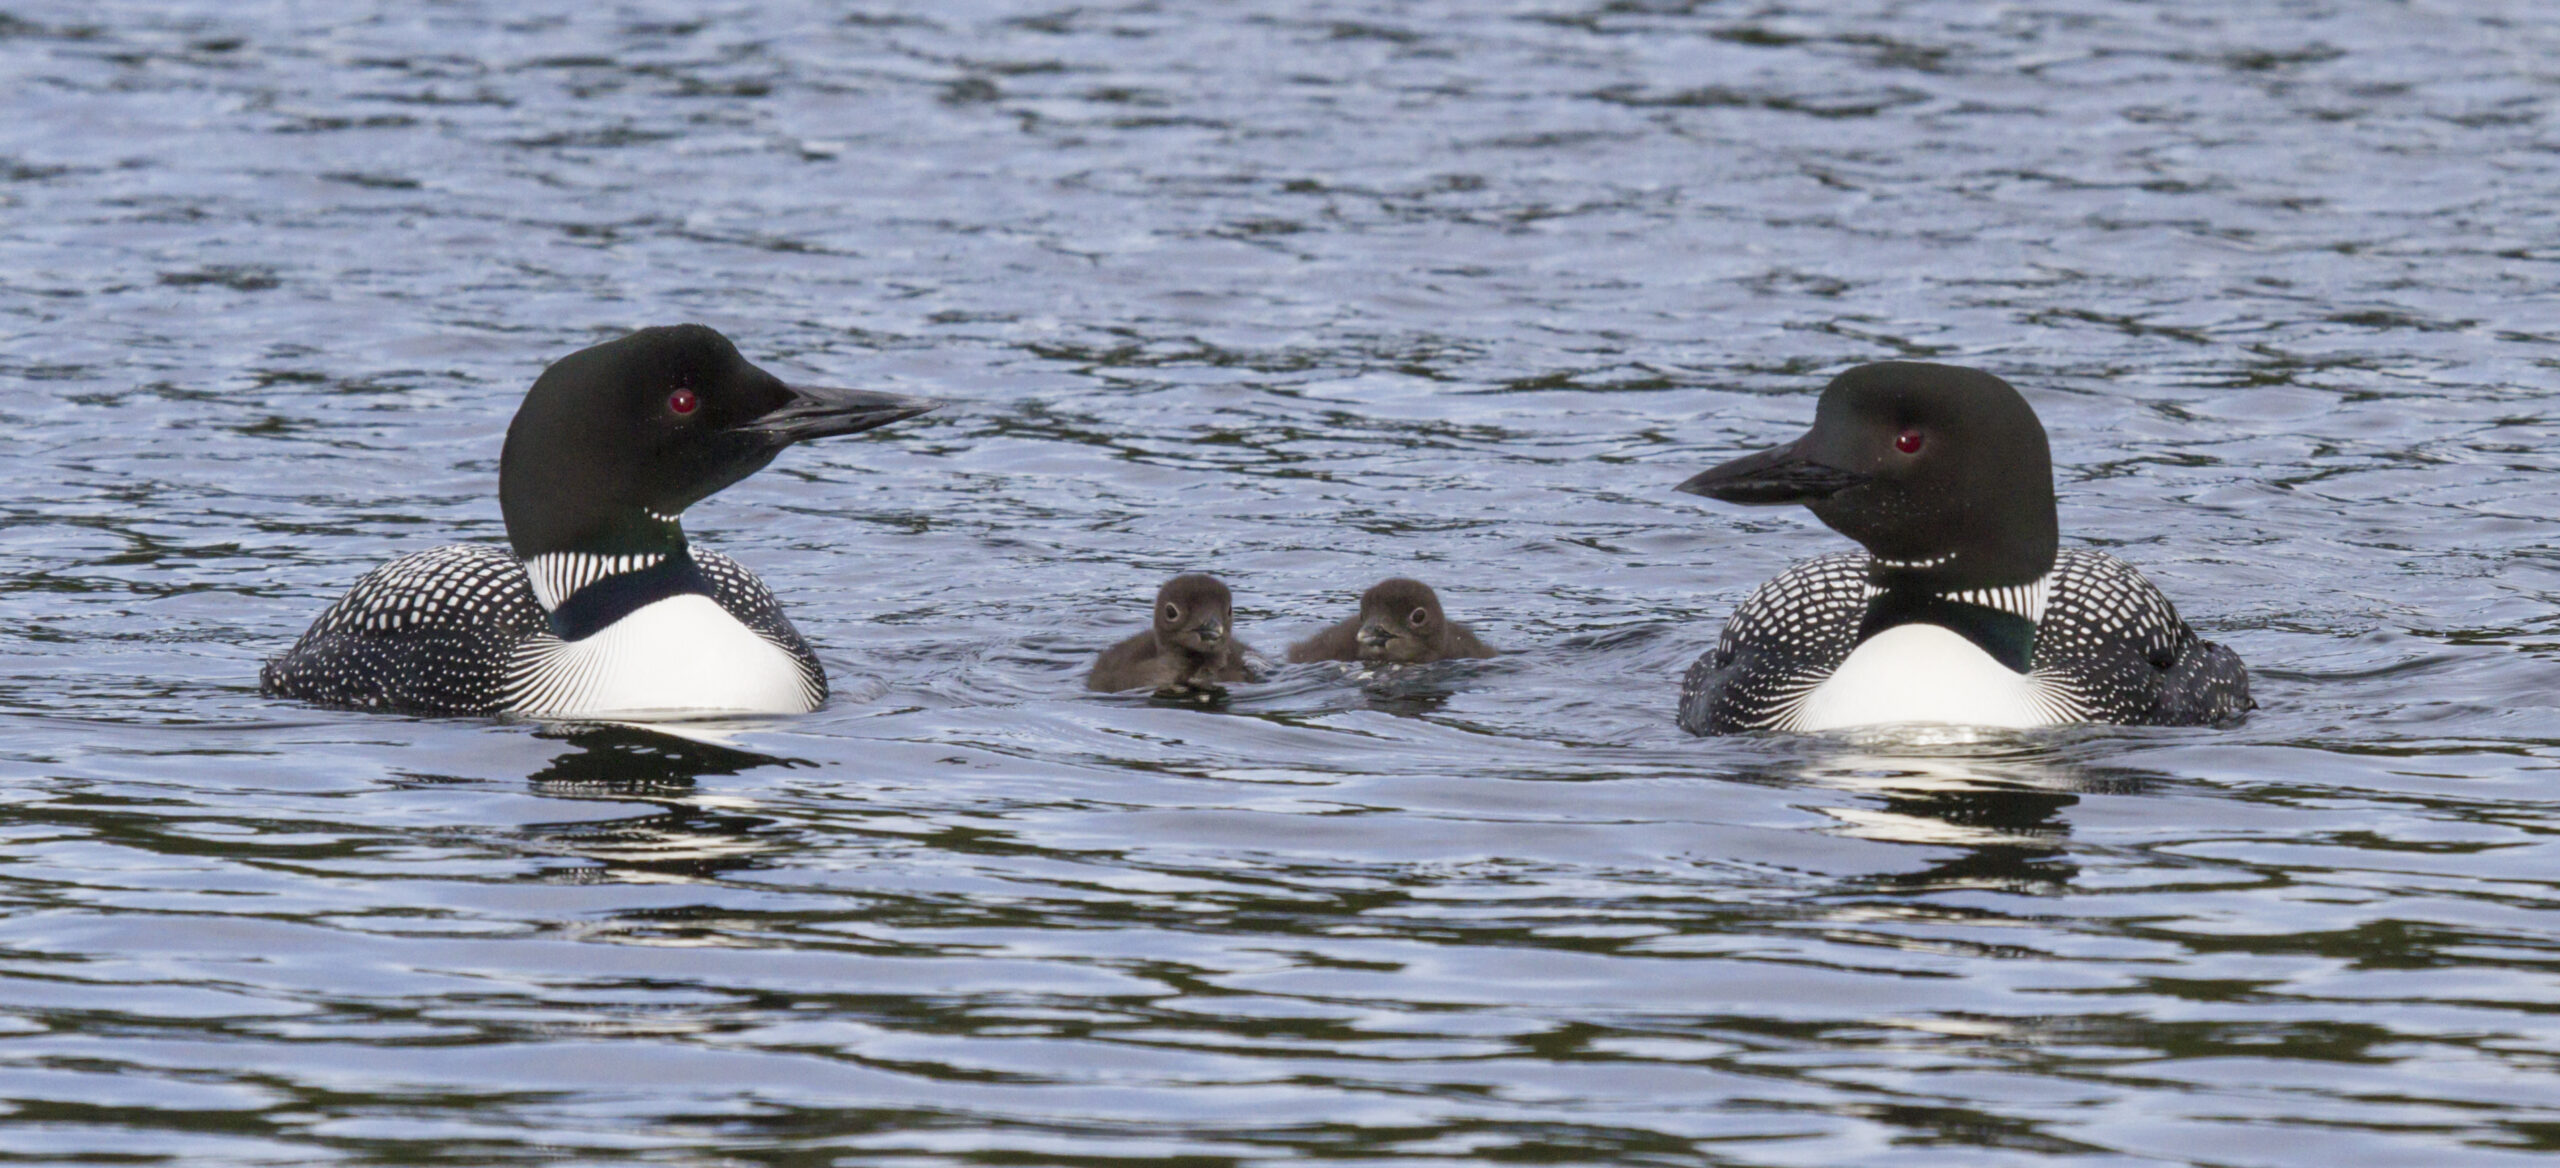 Loon family swims together